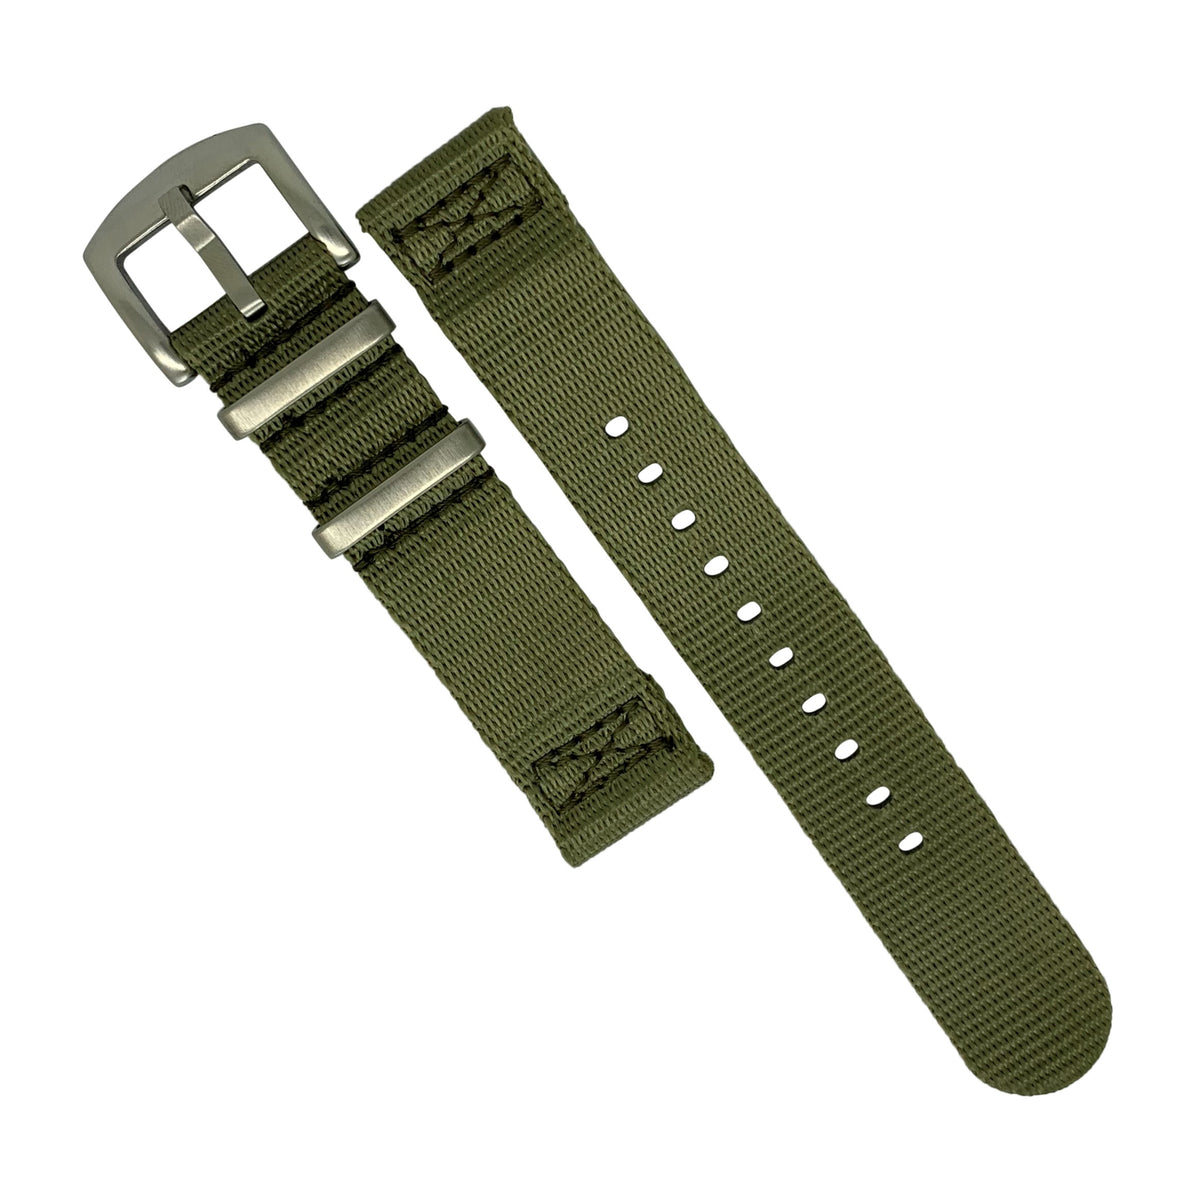 Two Piece Seat Belt Nato Strap in Olive with Brushed Silver Buckle (20mm) - Nomad watch Works